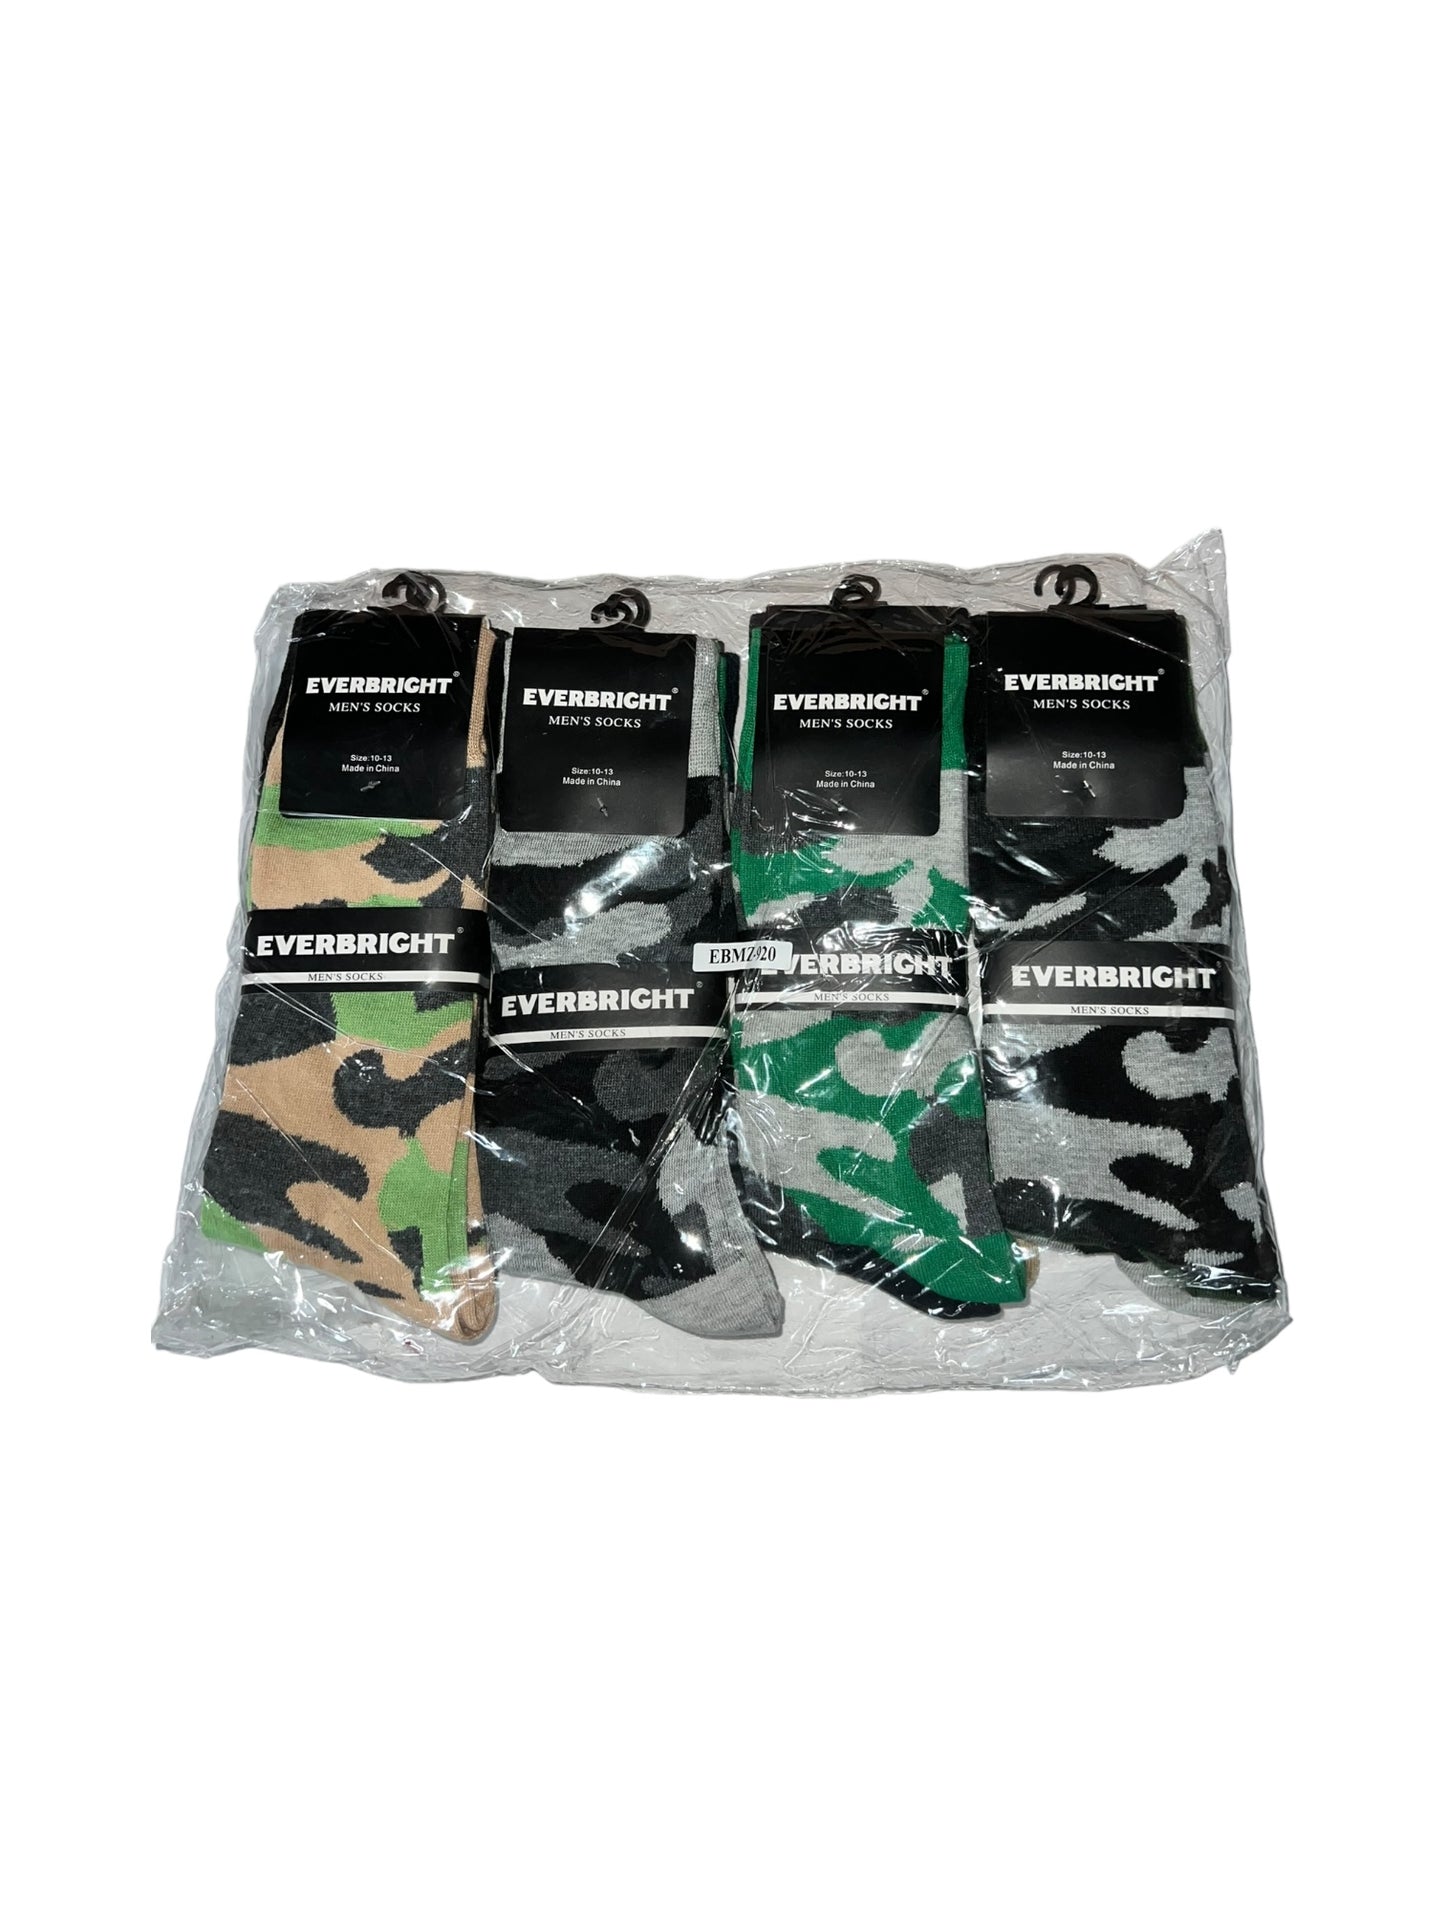 Everbright Men’s Socks Size 10-13 12-Pairs